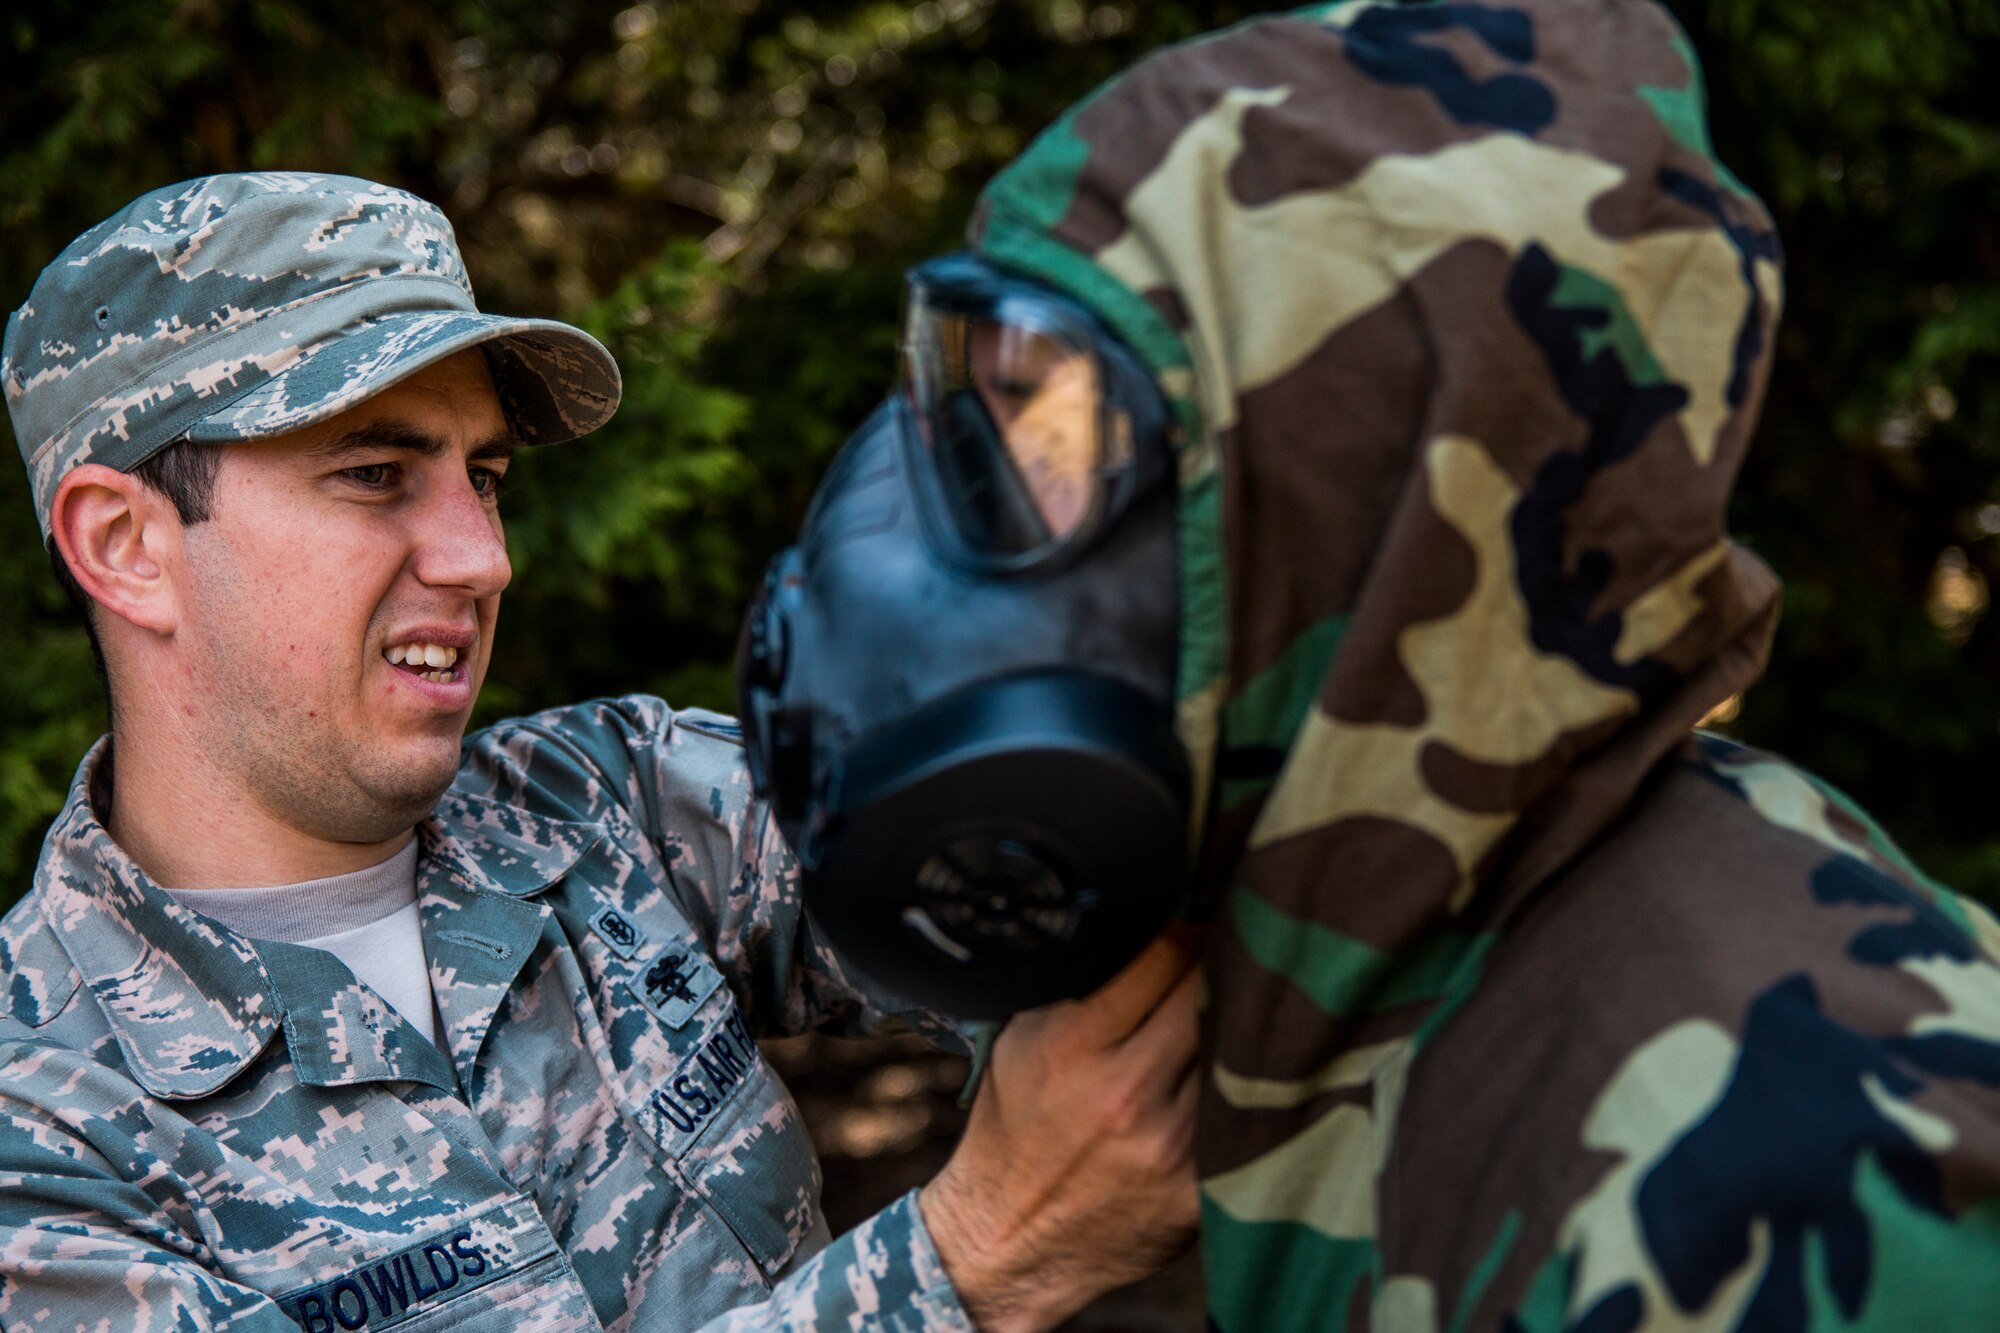 SrA Christopher Bowlds, 446th Aeromedical Staging Squadron medic, checks an Airman’s Mission Oriented Protective Posture gear in preparation for the annual Expert Field Medical Badge test at McChord Field, Wash., Aug. 2, 2015. The Expert Field Medical Badge is a unique distinction worn only by the most battle-ready and elite medical personnel in the military. Every year at Joint Base Lewis-McChord, Wash., a  two-week intensive testing event is set up to qualify eligible service members from around the country for the right to wear the coveted badge. (U.S. Air Force photo by Senior Airman Daniel Liddicoet)